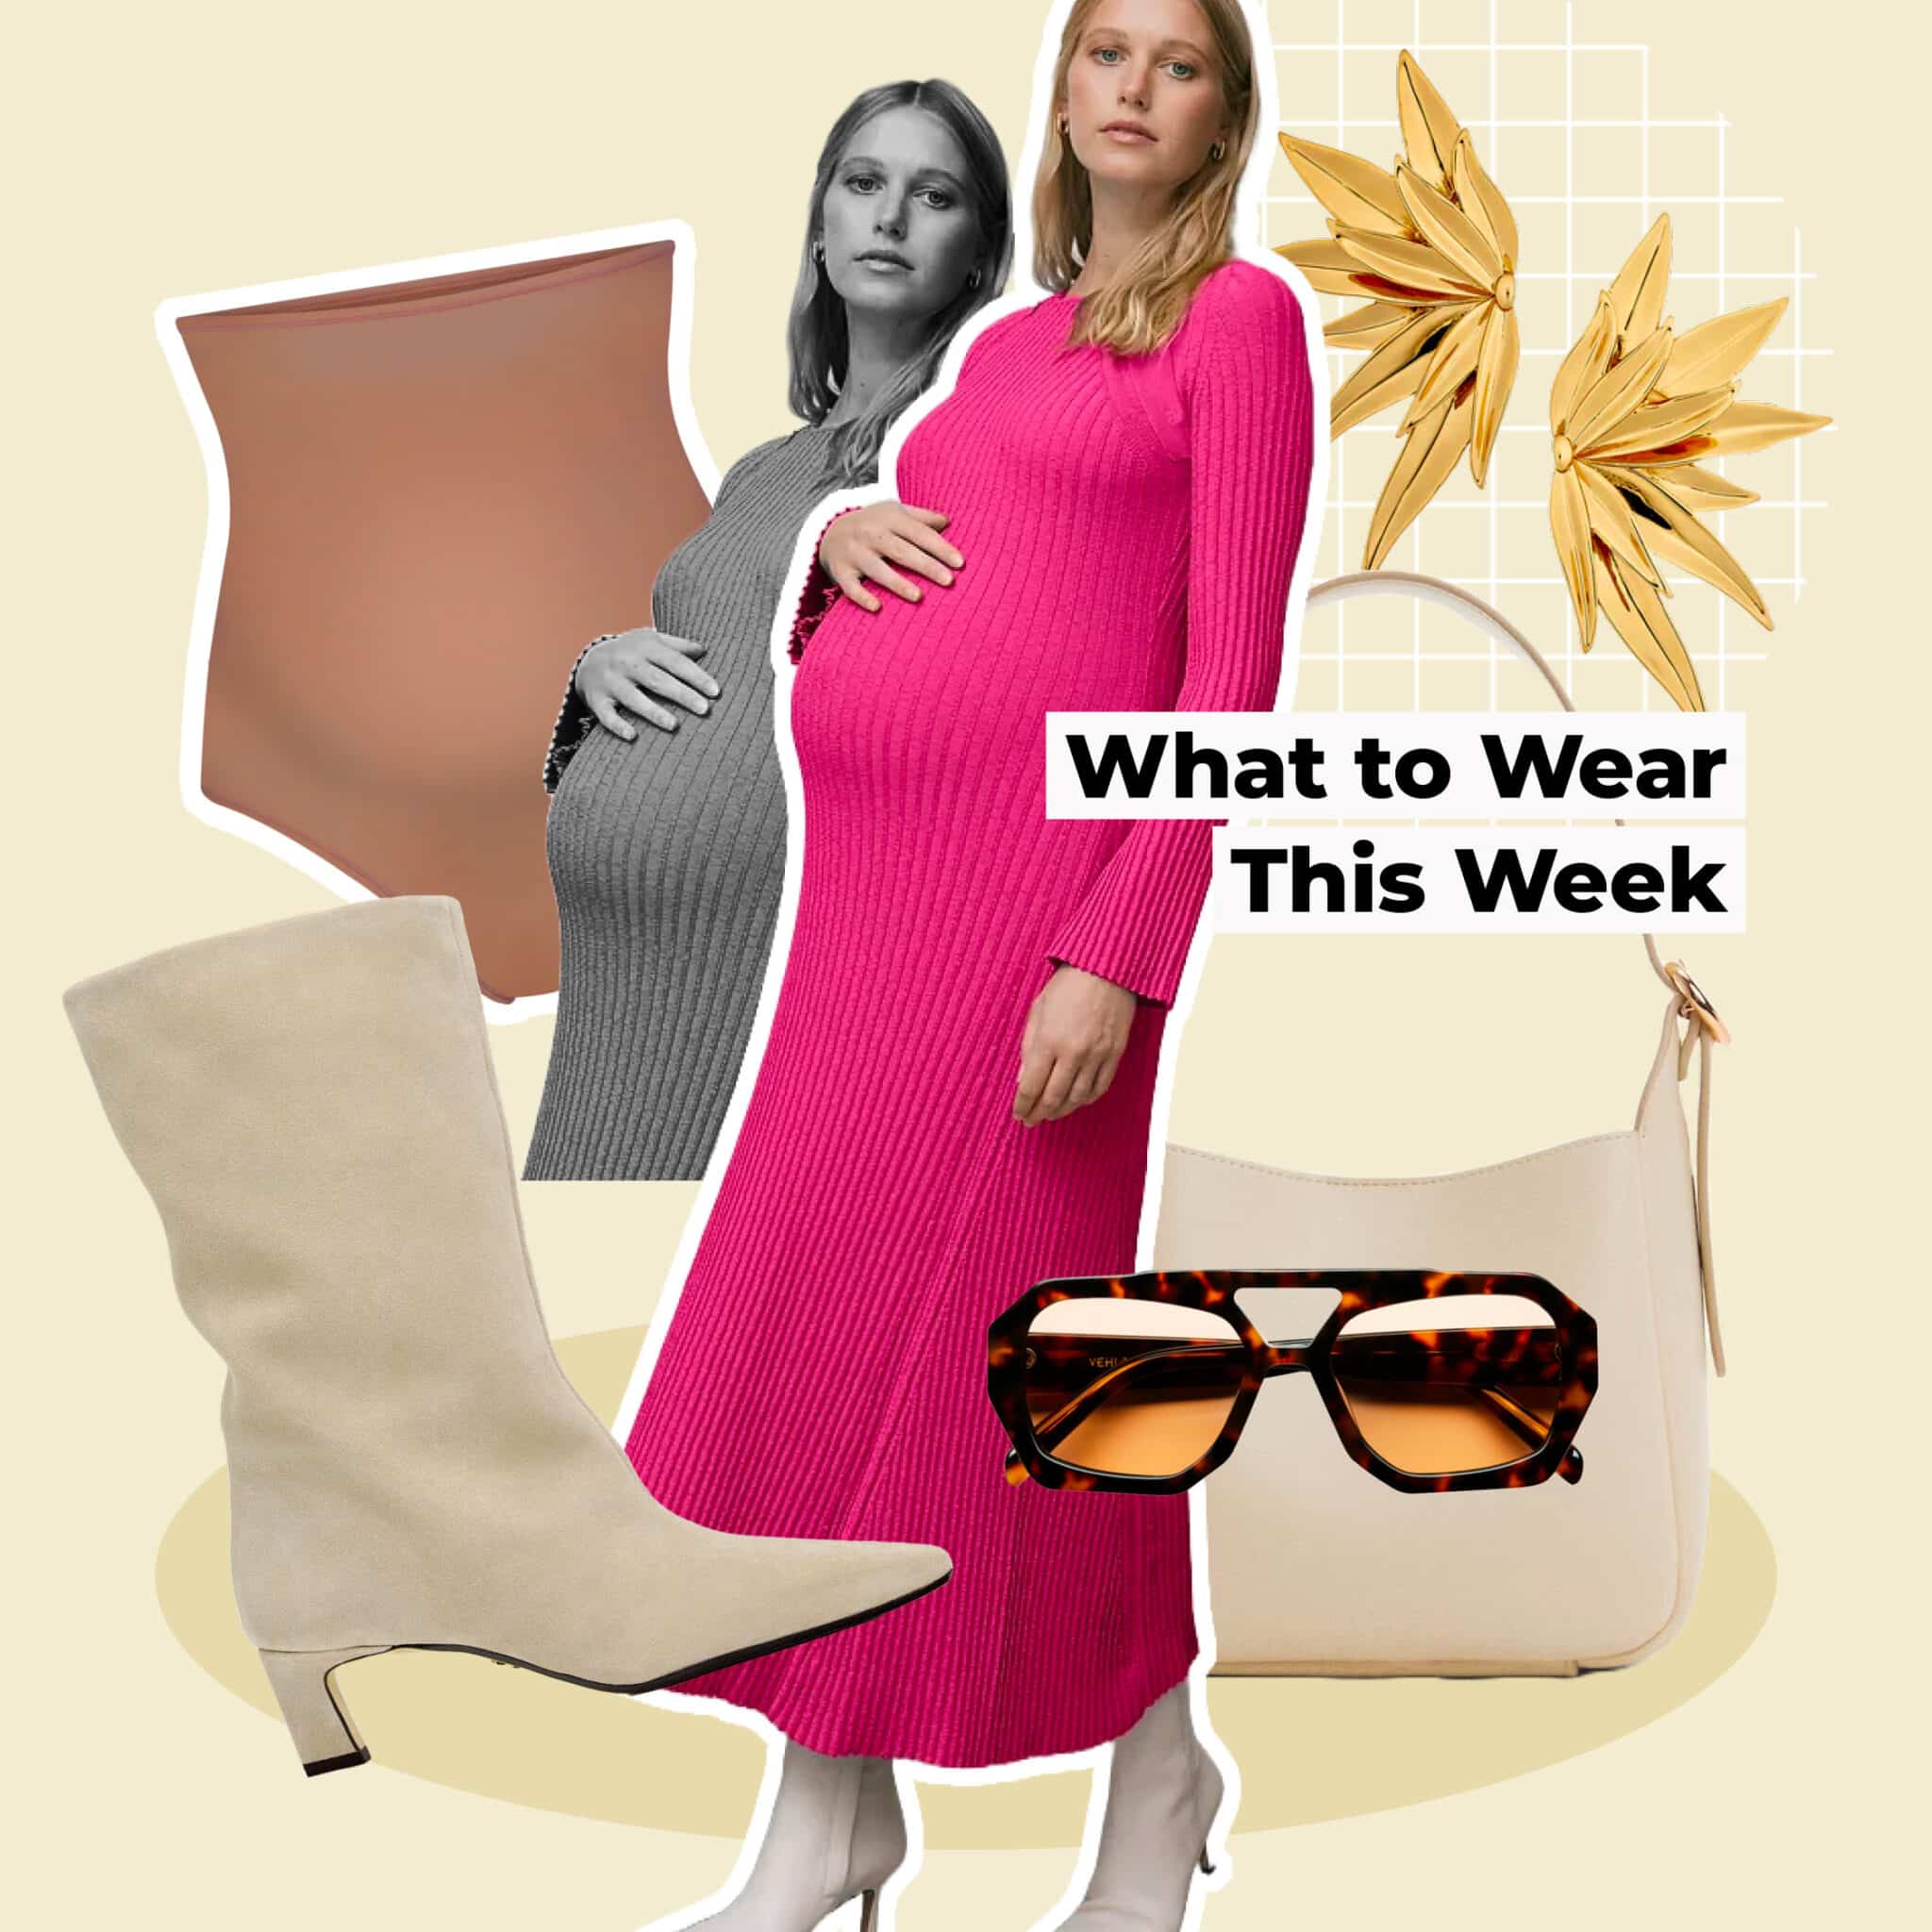 What to Wear This Week